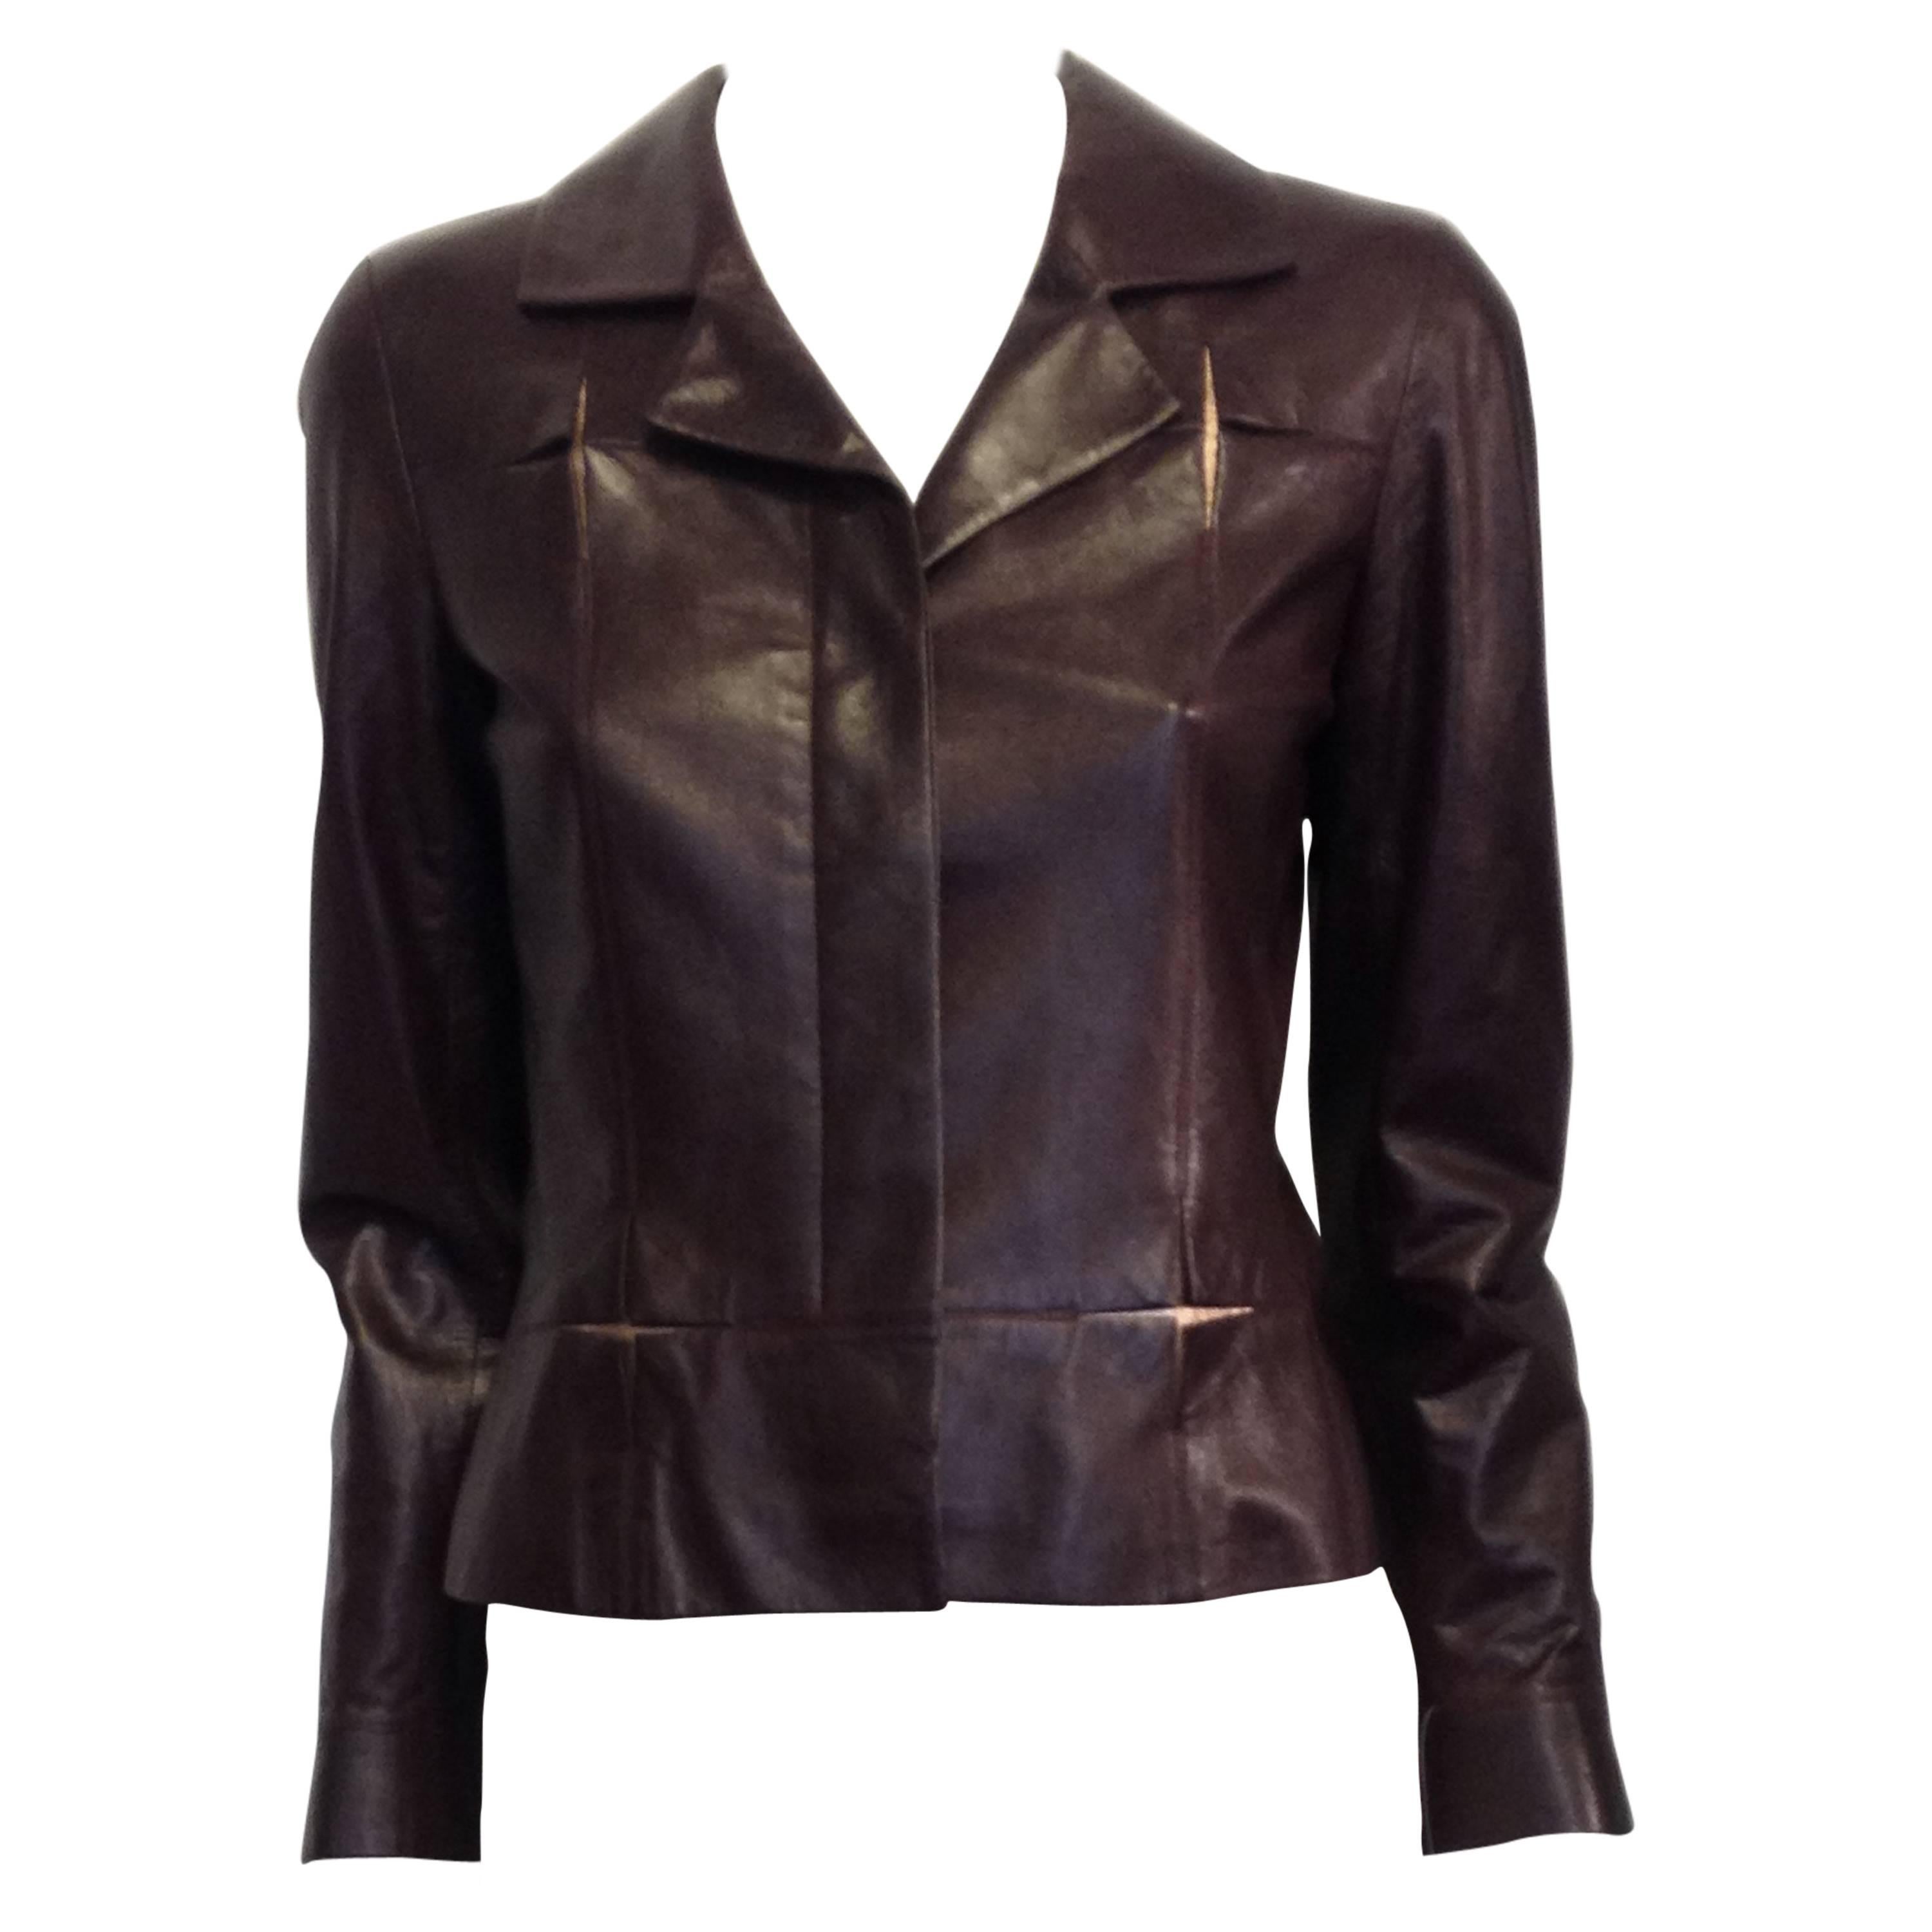 Chanel Burgundy Leather Jacket with Rose Gold Insets For Sale